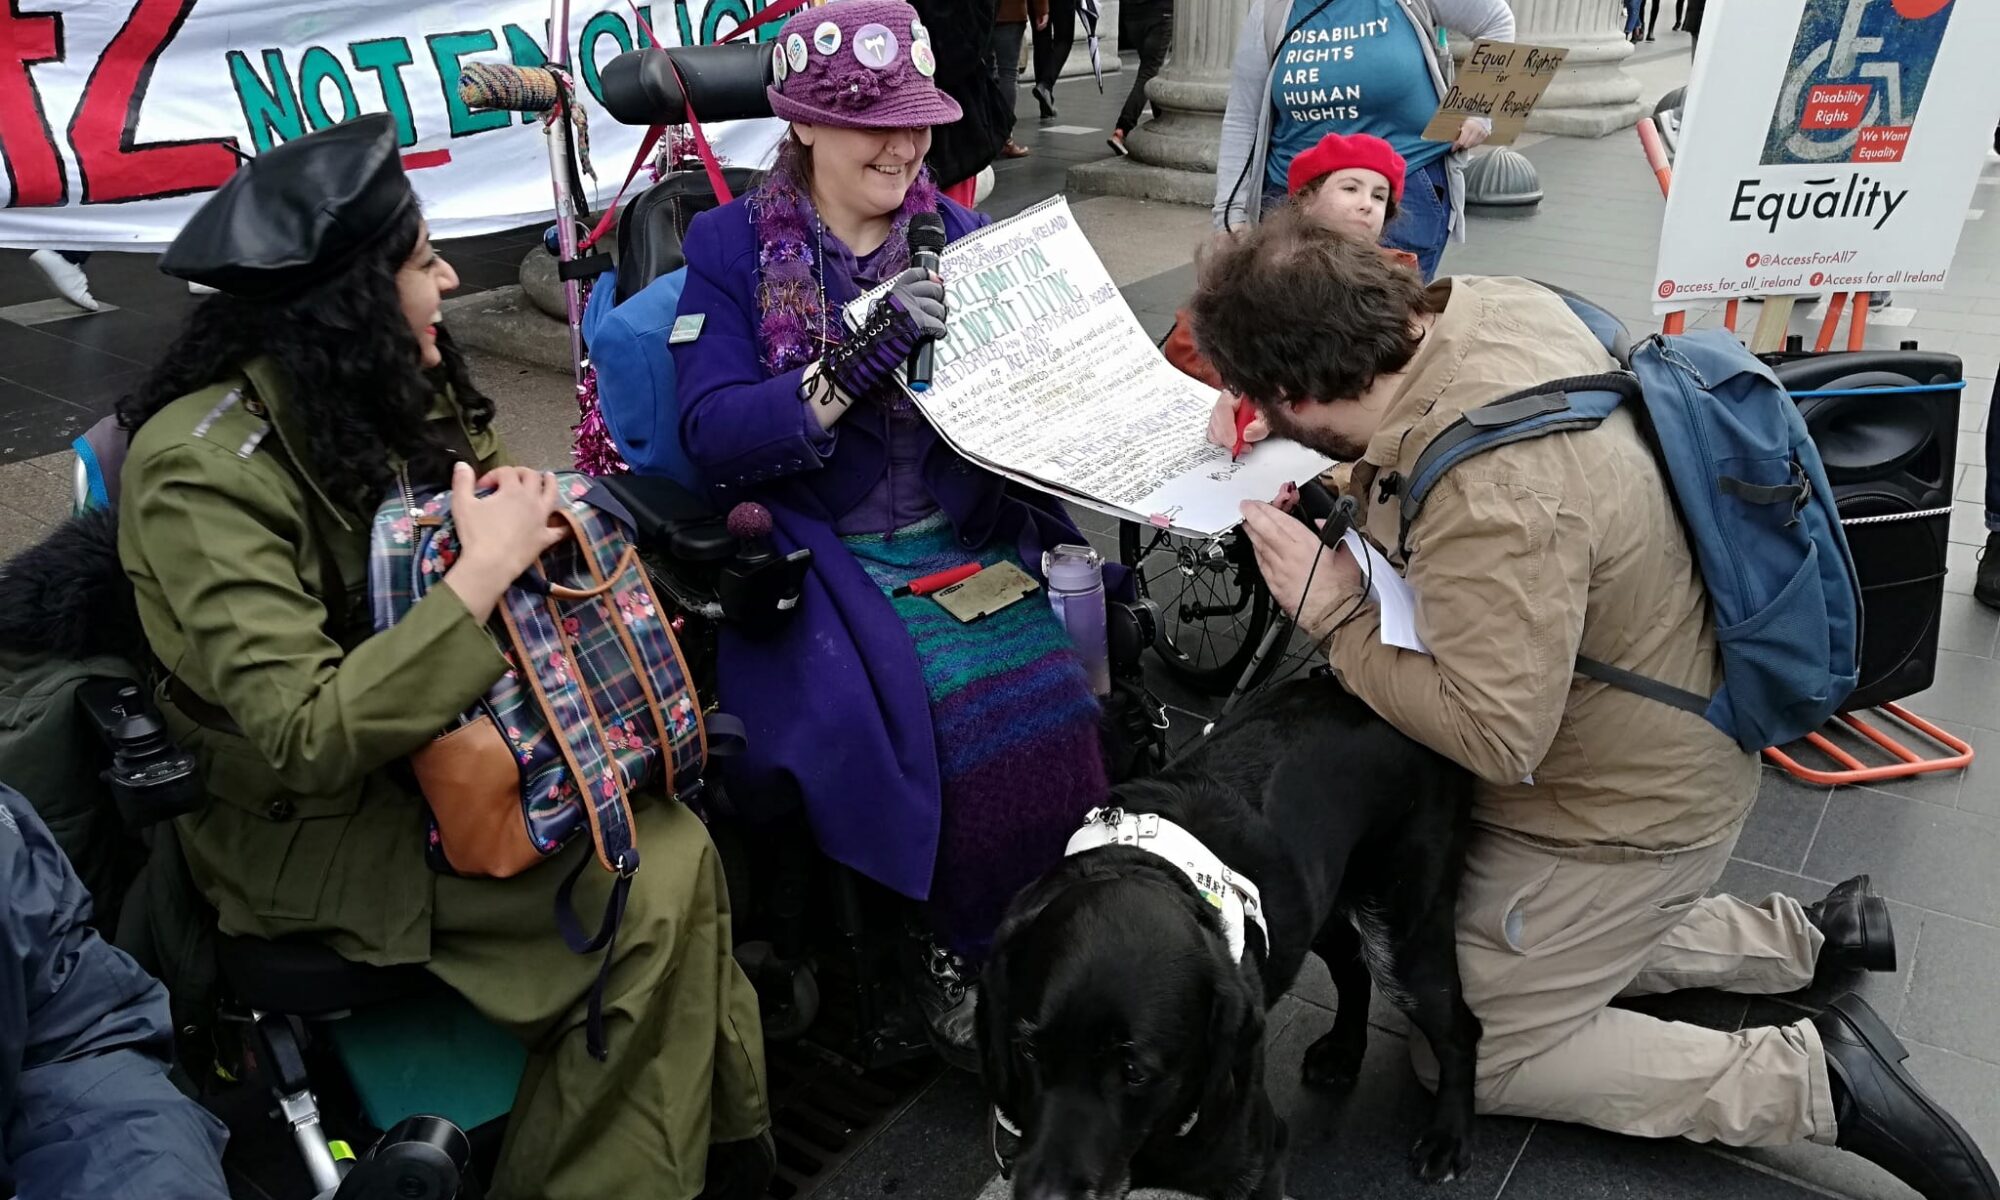 Image shows Peadar O'Dea kneeling before the Proclamation held up by Isolde. He is signing it. Isolde wears a 1916-inspired purple hat and outfit, is in an electric chair with her black lab assistance dog also at her feet. Peadar has dark curly hair and wearing khaki. Beside them is Maryam Madani with black curly hair and a black pleather beret, brown skin, wearing a Countess Markievicz-inspired outfit. Behind them is the banner "42 minutes is not enough". They are in front of the GPO, with other protesters around them.